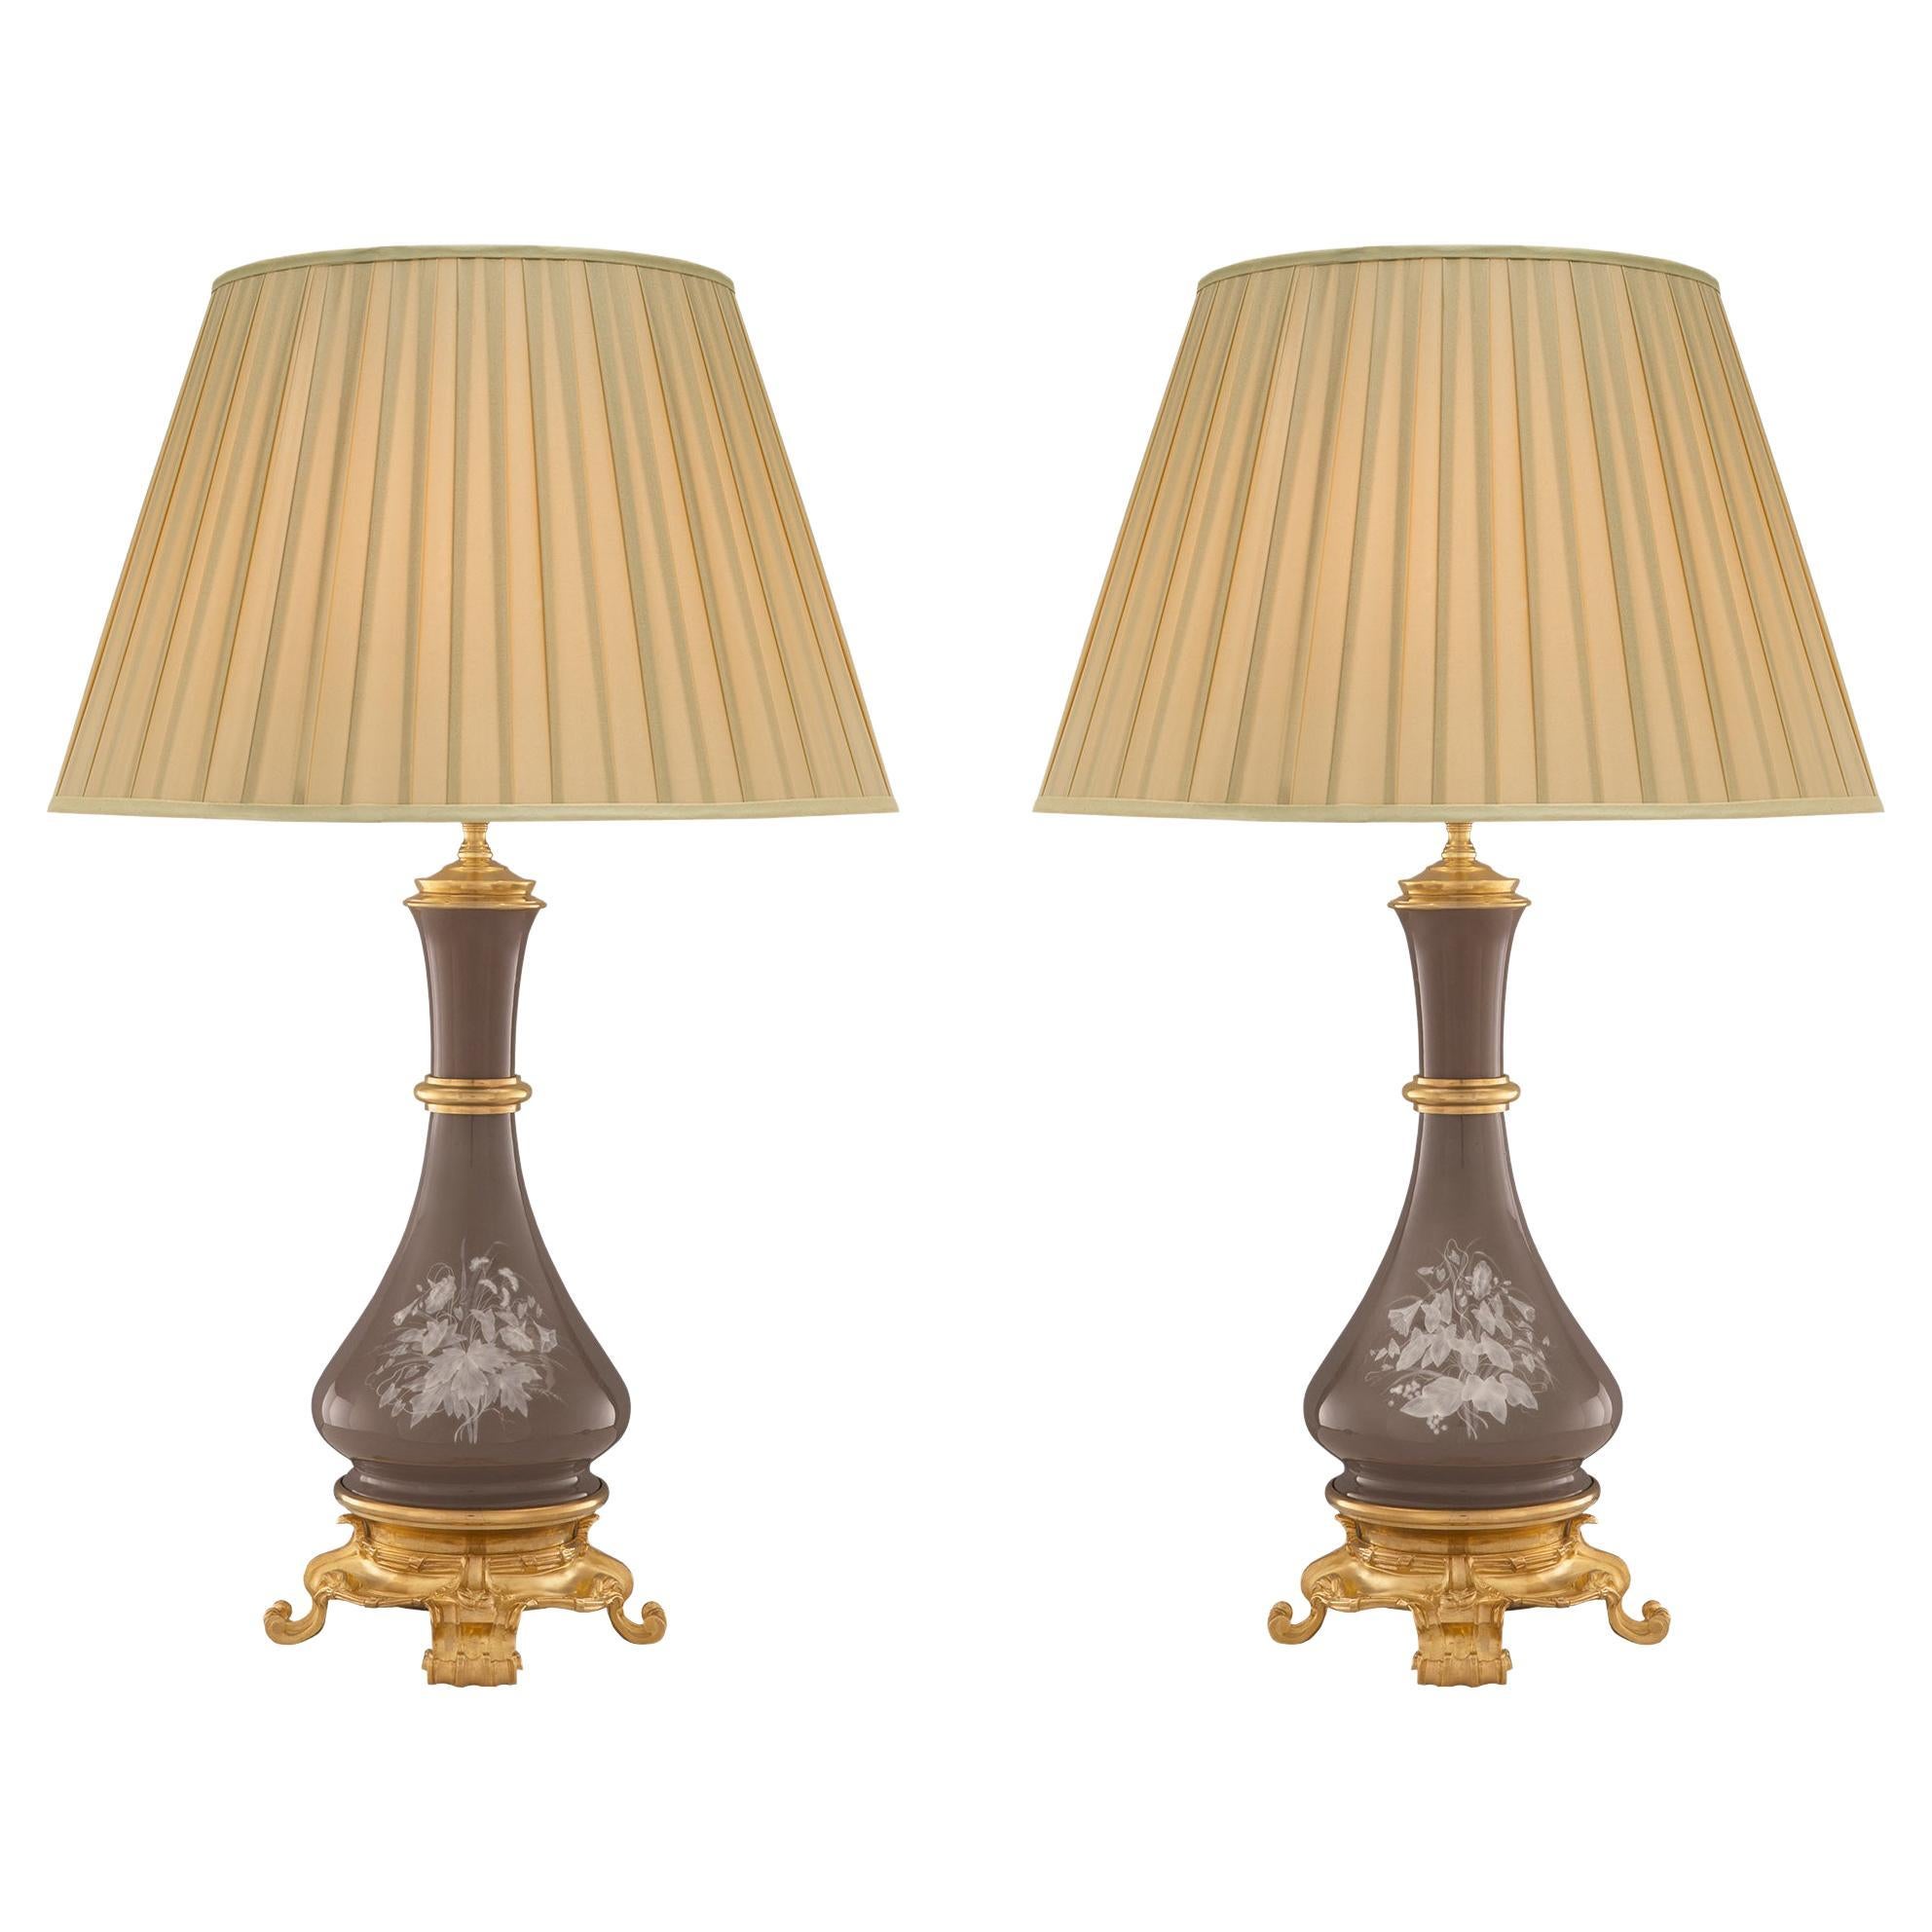 Pair of French 19th Century Louis XVI Style Porcelain and Ormolu Lamps For Sale